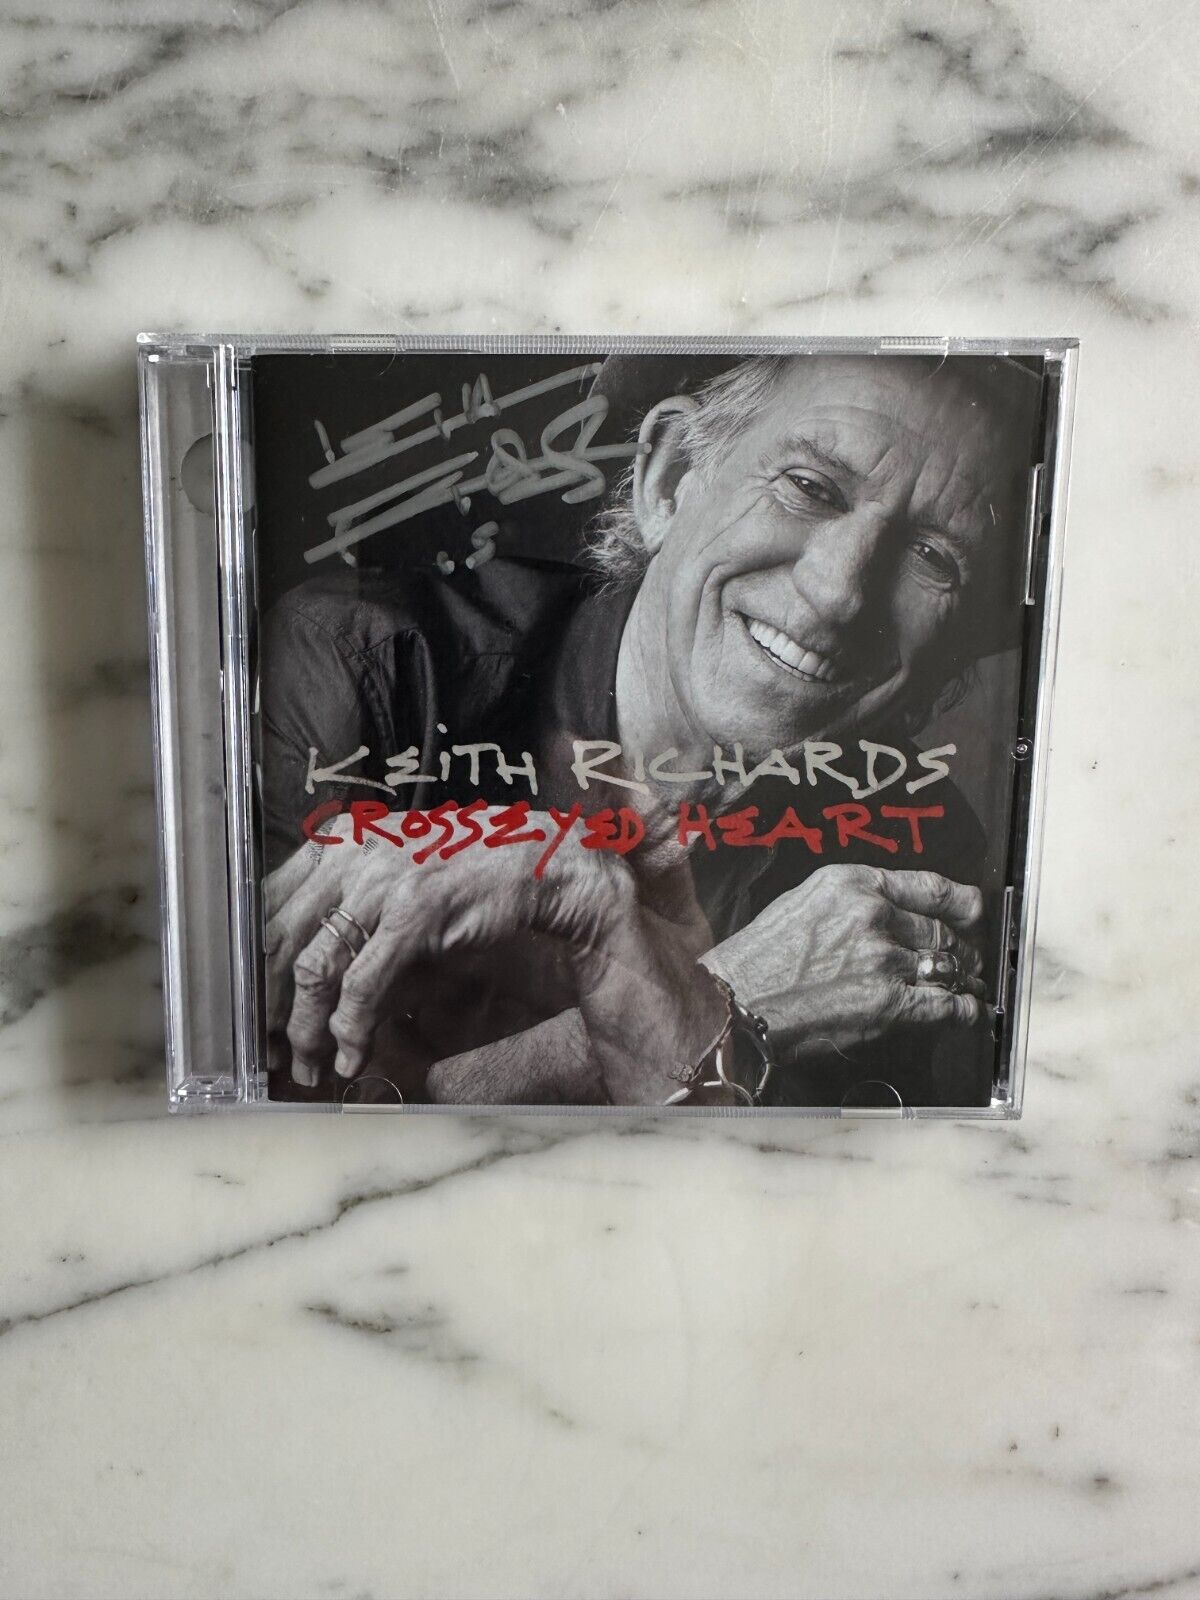 KEITH RICHARDS 2015 AUTOGRAPHED CROSSEYED HEART CD NEW OLD STOCK NEVER PLAYED